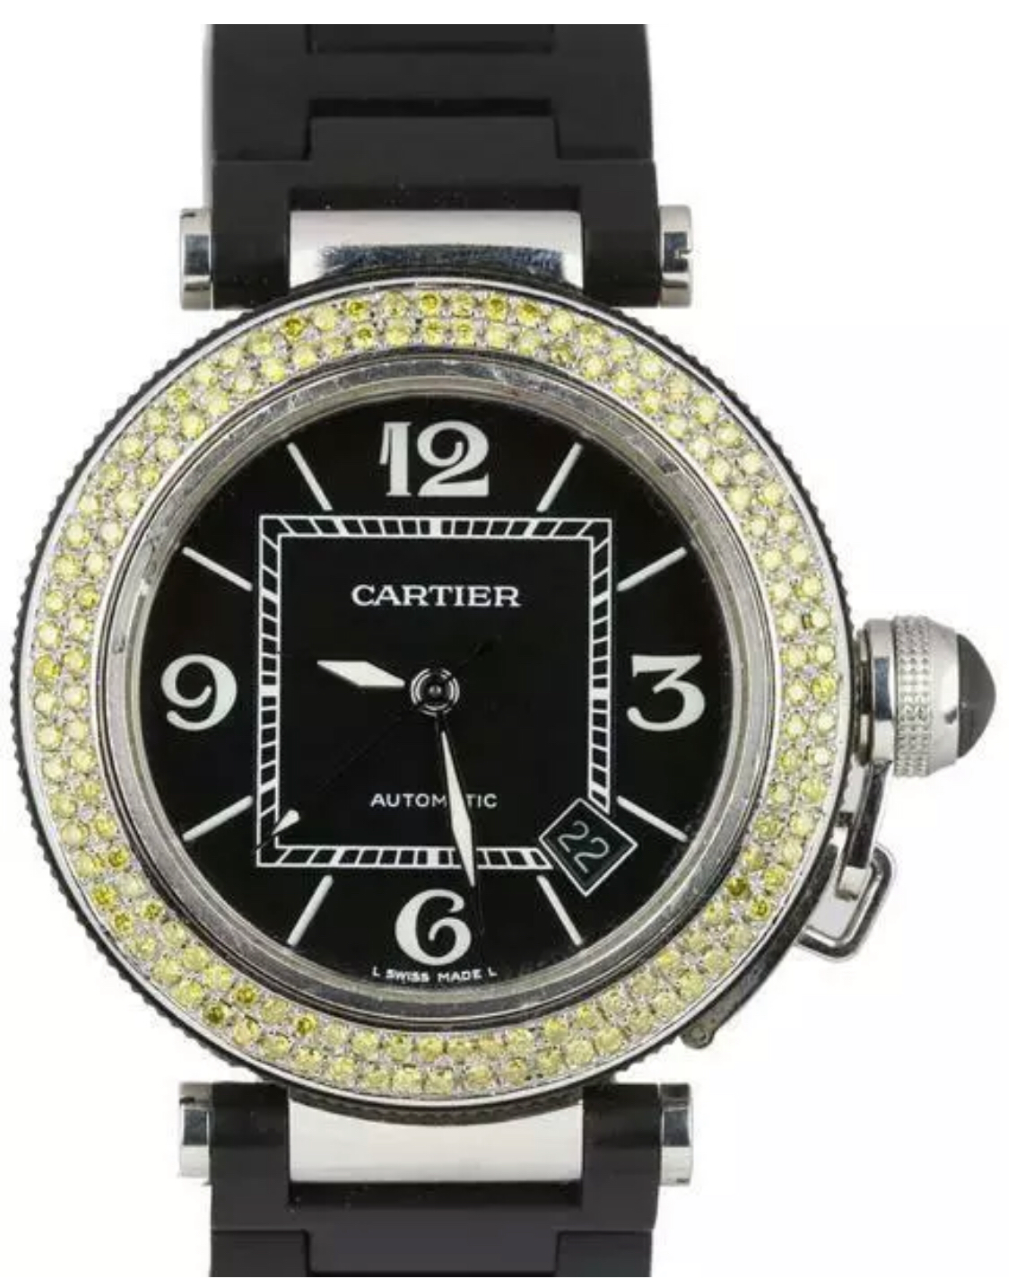 Cartier Diamond Watch Collectors Coins & Jewelry Lynbrook (516)341-7355